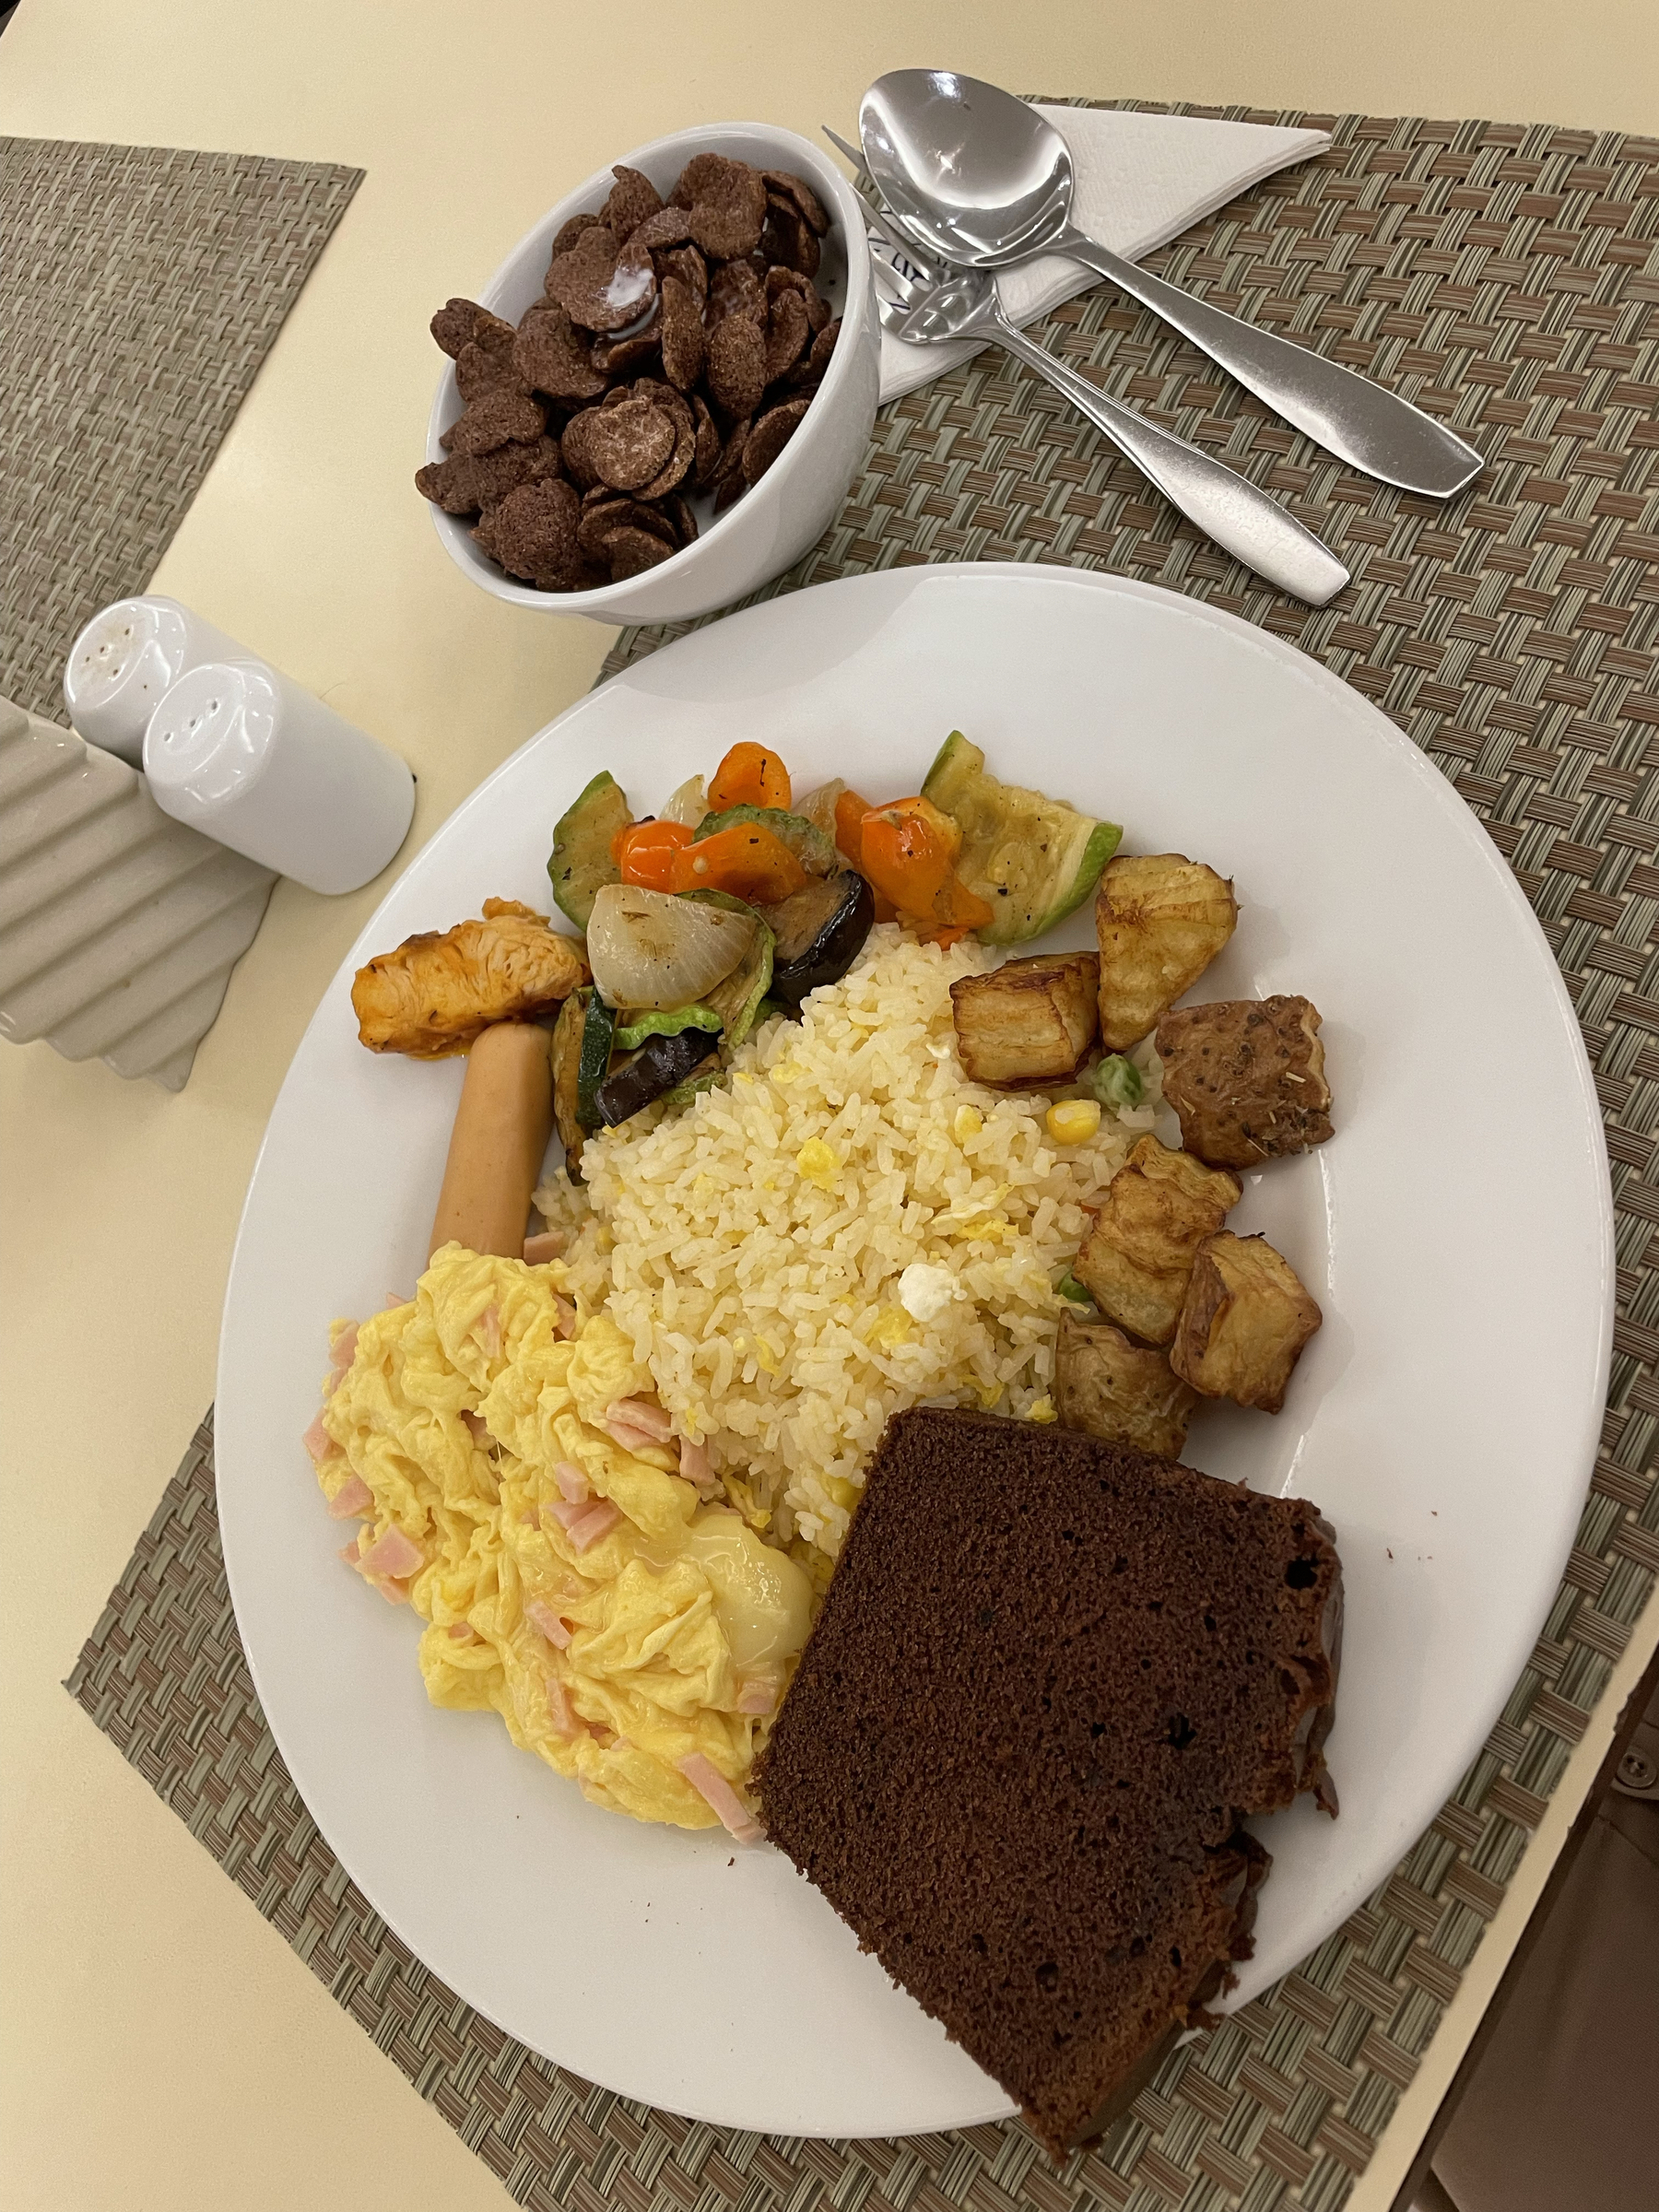 Chi’s breakfast from the hotel: scrambled egg with ham and cheese, a chicken sausage, some steamed vegetables, sweet and sour fish, with egg fried rice and a brownie. She also has a bowl of Koko Crunch chocolate cereal.